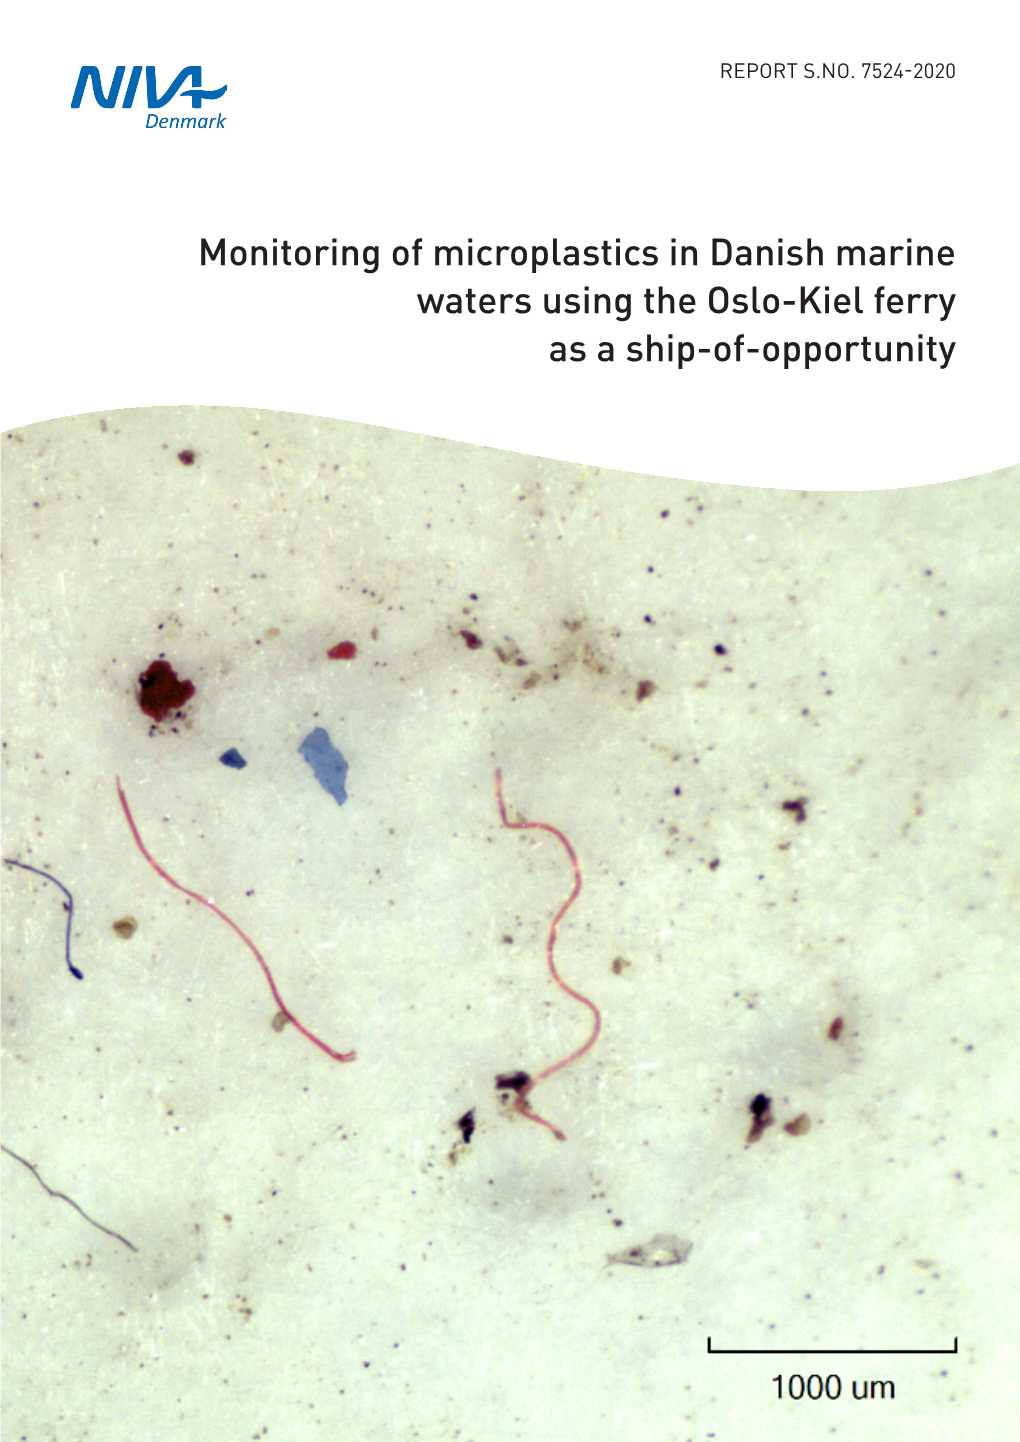 Monitoring of Microplastics in Danish Marine Waters Using the Oslo-Kiel Ferry As a Ship-Of-Opportunity